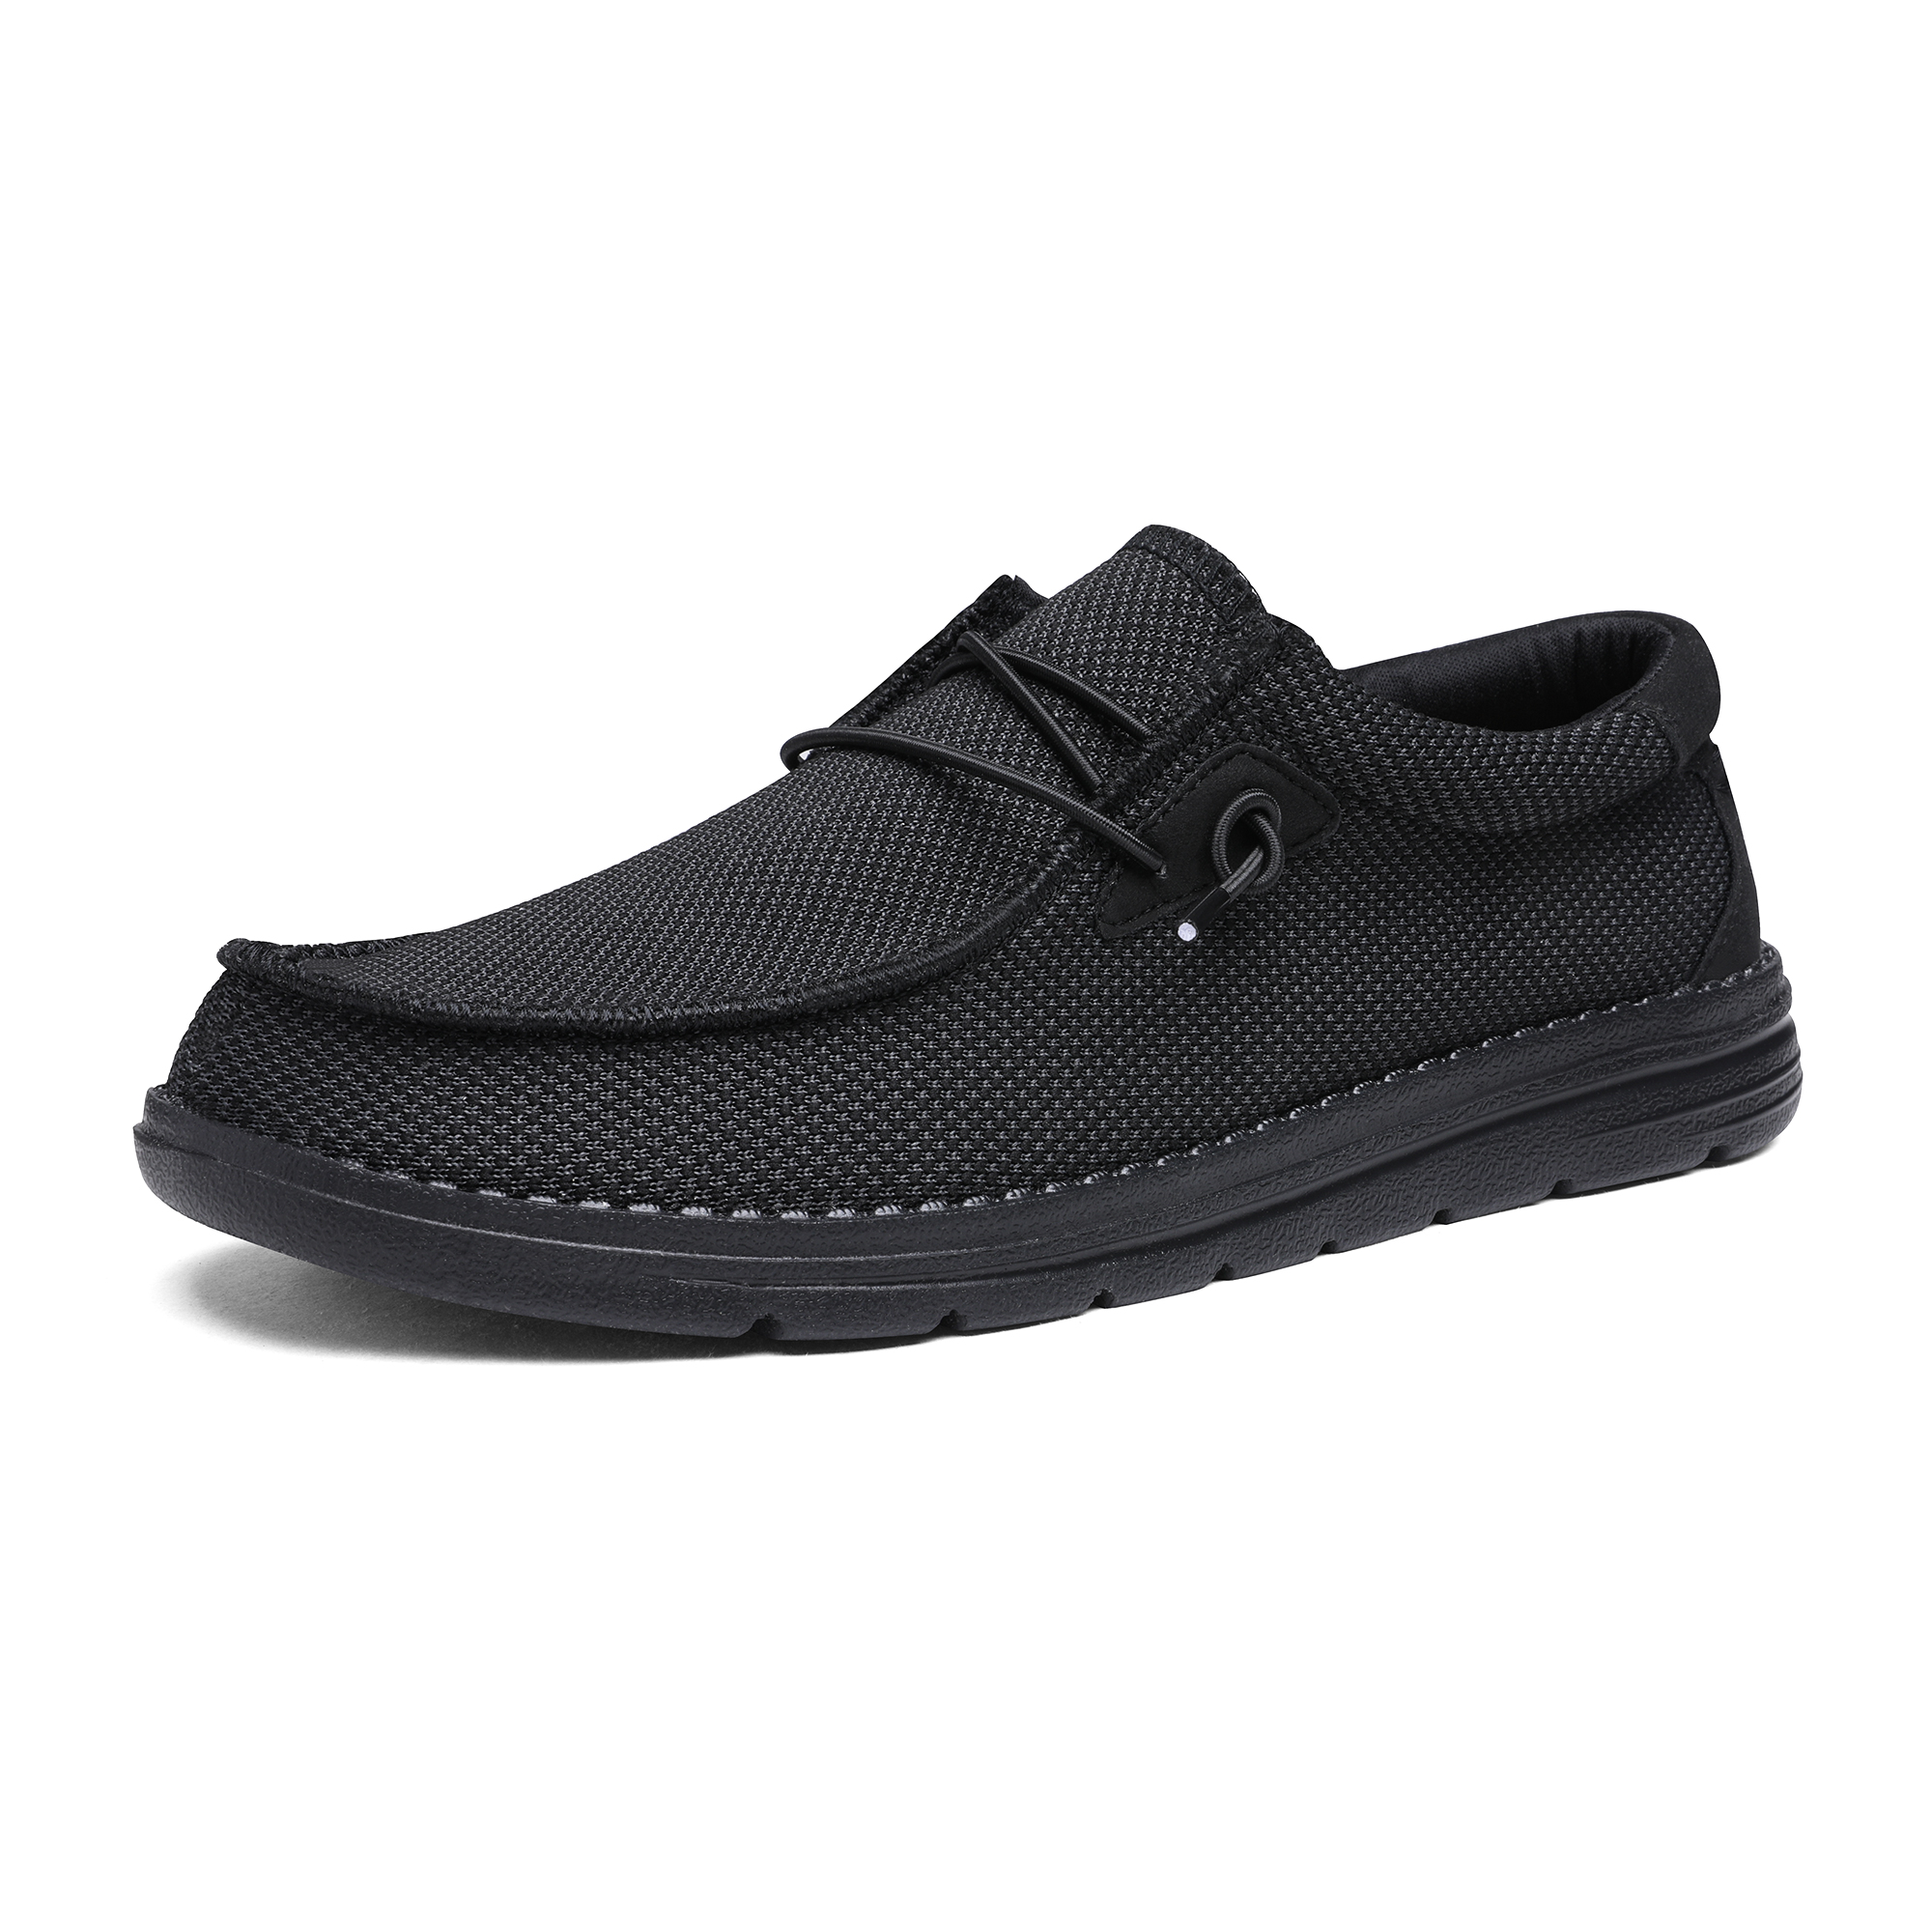 Bruno Marc Men's Comfort Tennis Shoes Casual Slip-on Loafers Lightweight Stretch Shoes Outdoor Indoor Sneakers BLS211 BLACK Size 8 - image 1 of 5